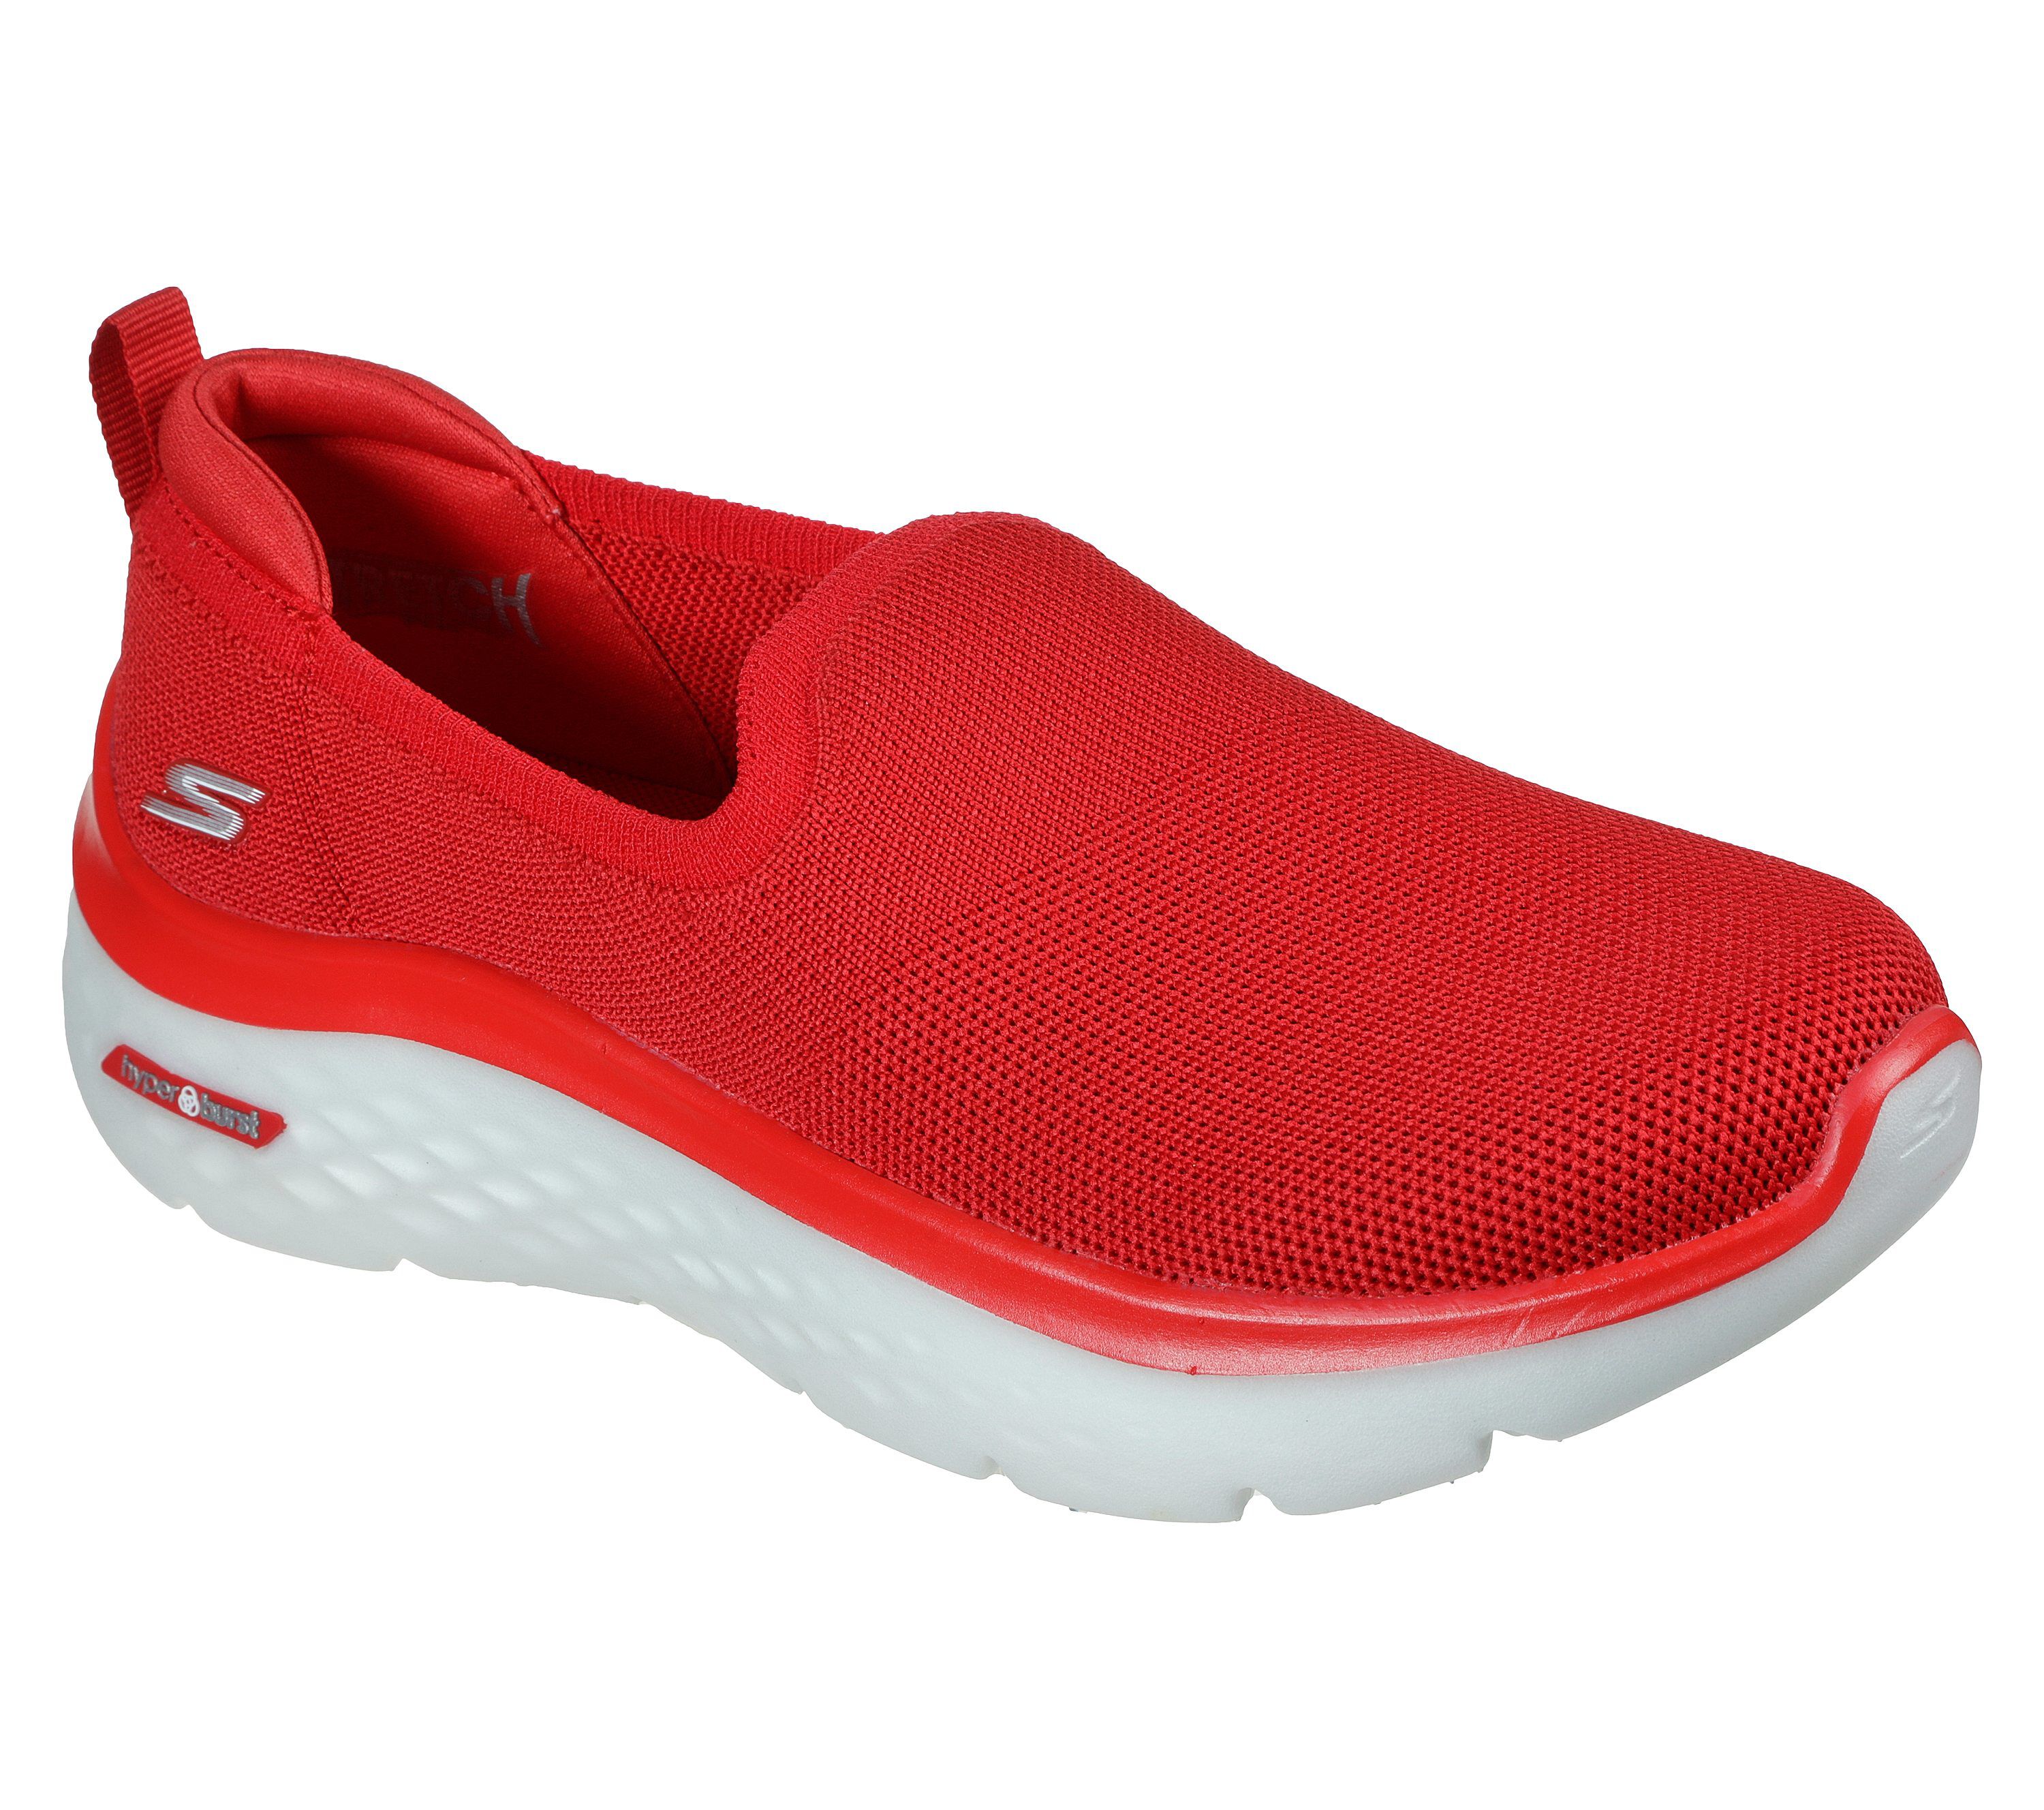 skechers shoes with price